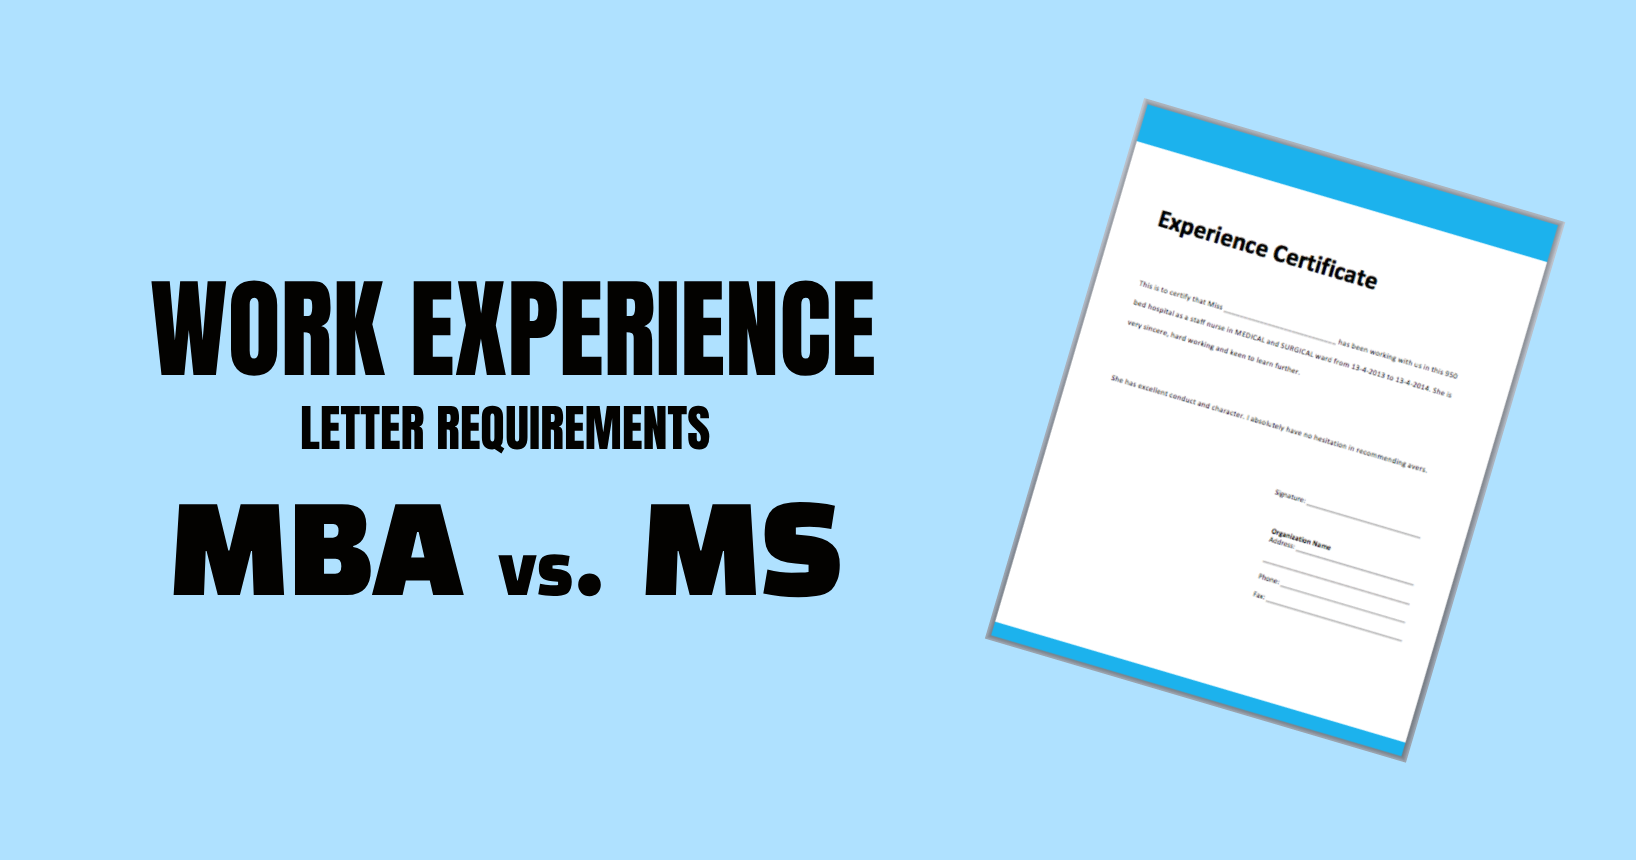 Work Experience Letter Requirement for MBA vs. MS